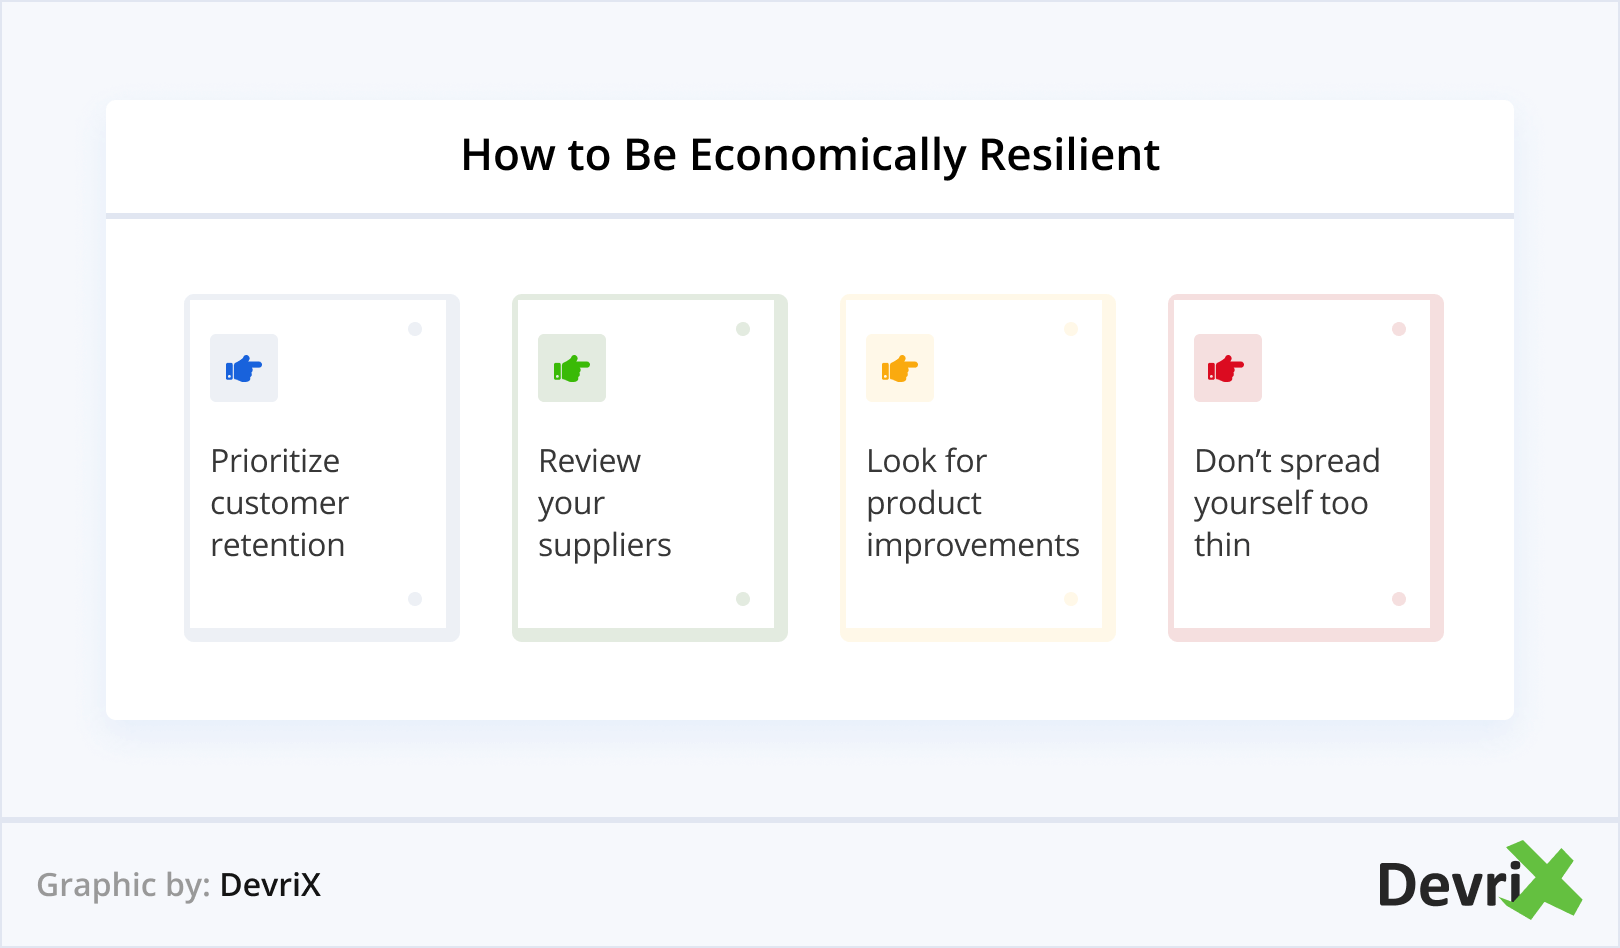 How to Be Economically Resilient